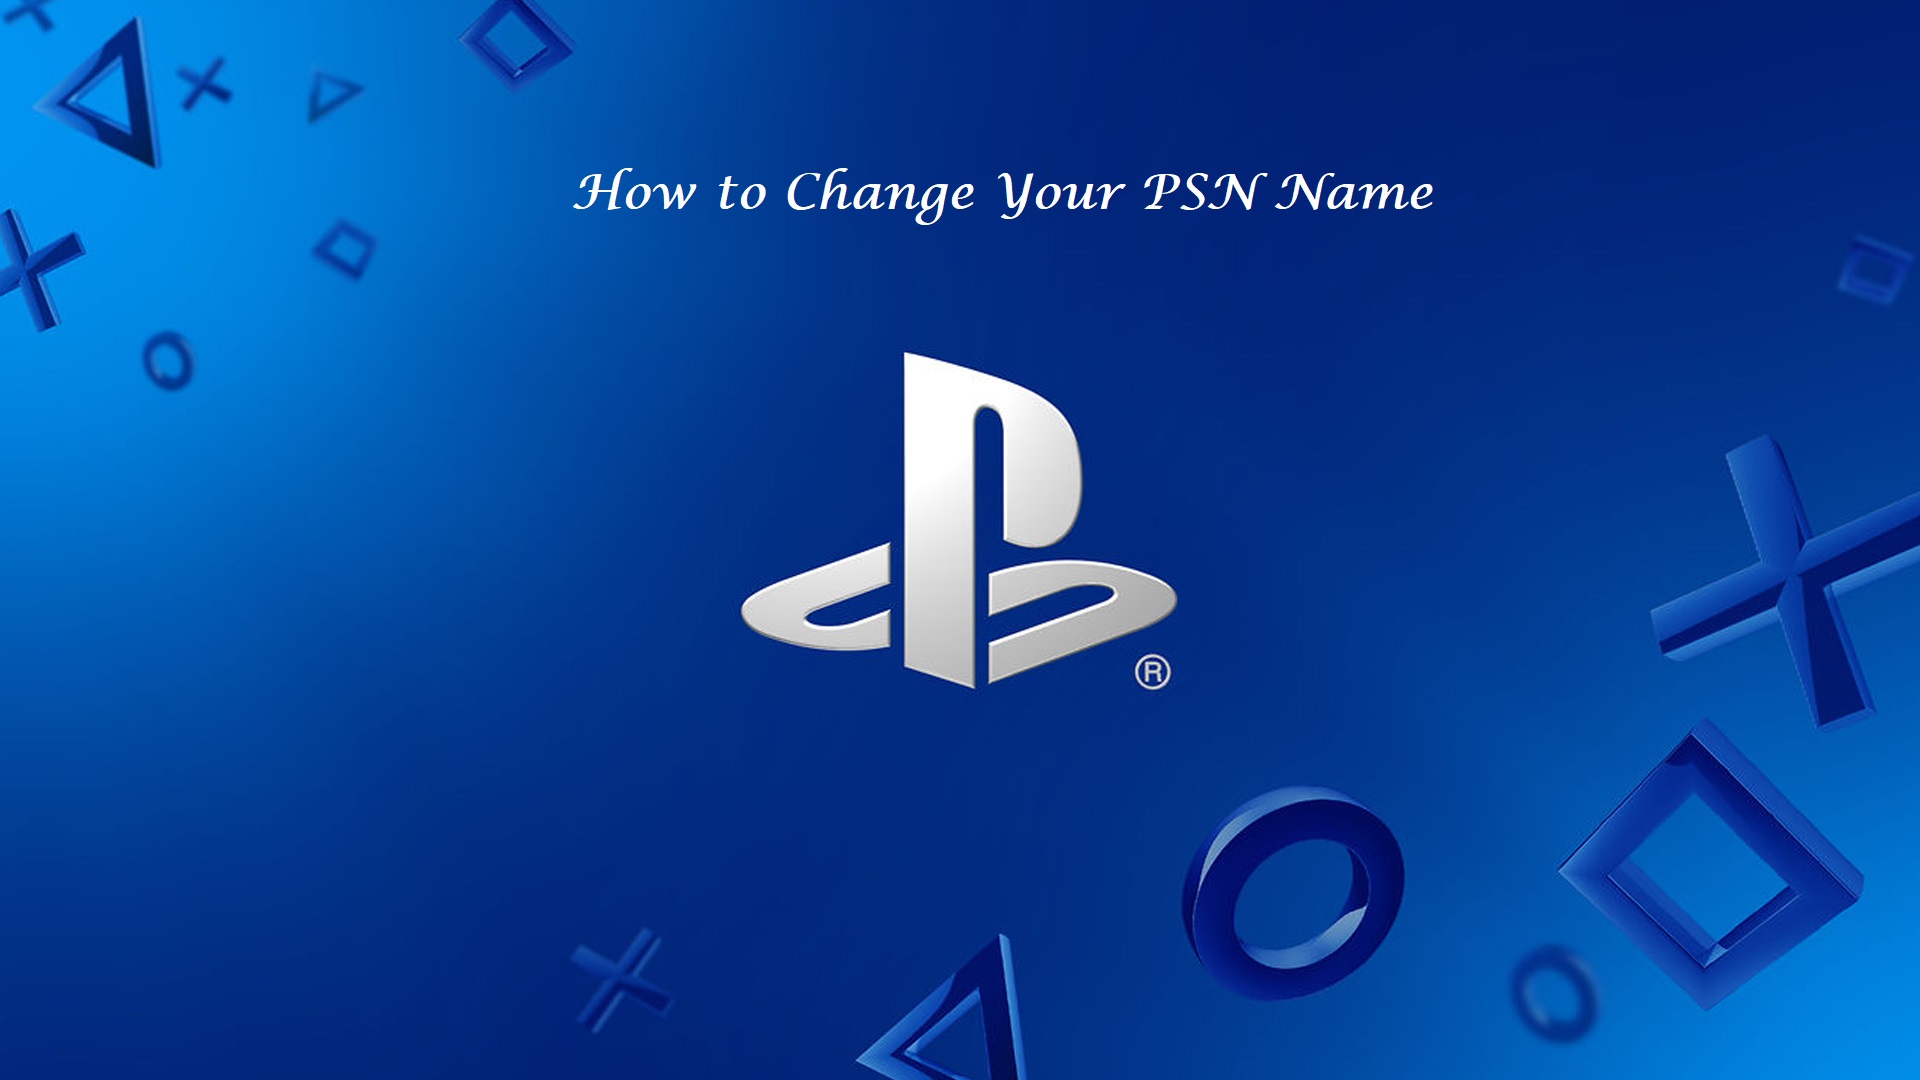 How to Change Your PSN Name